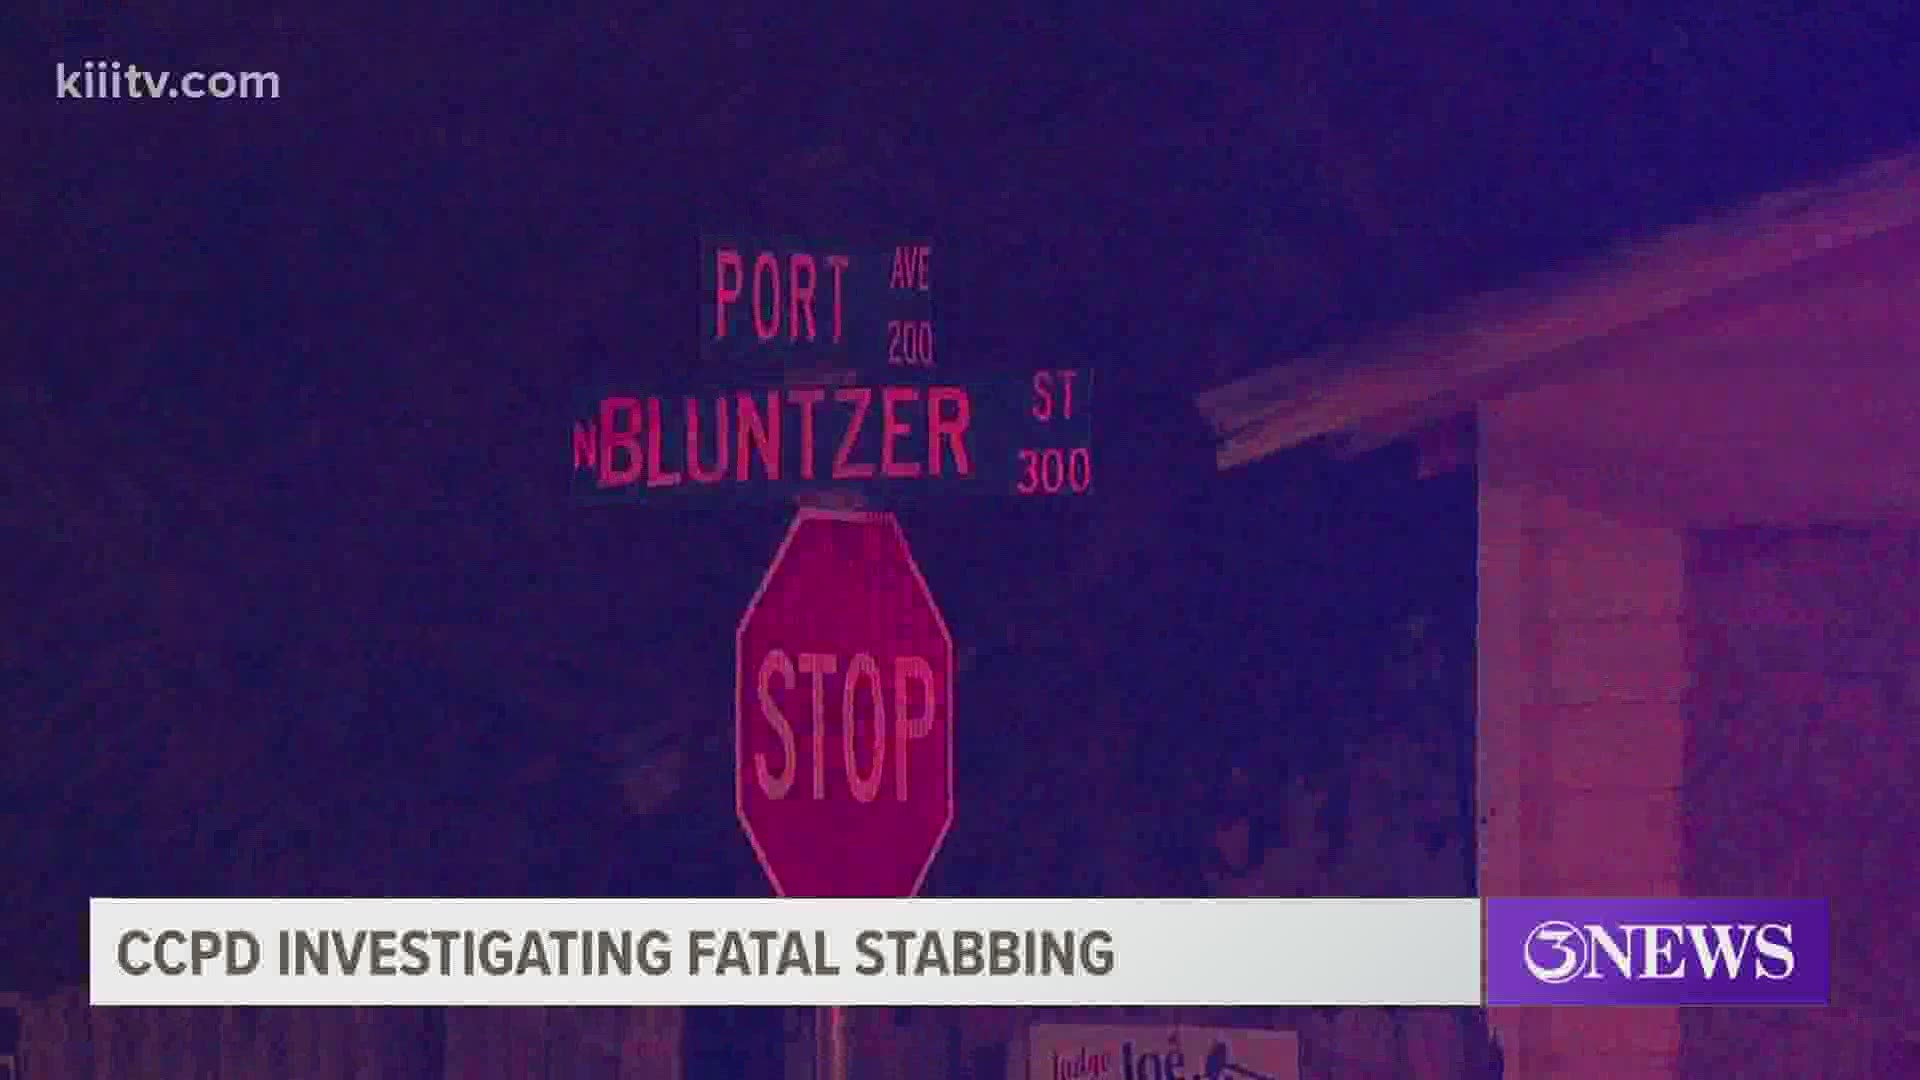 Officers say the woman in her 40s was stabbed multiple times.